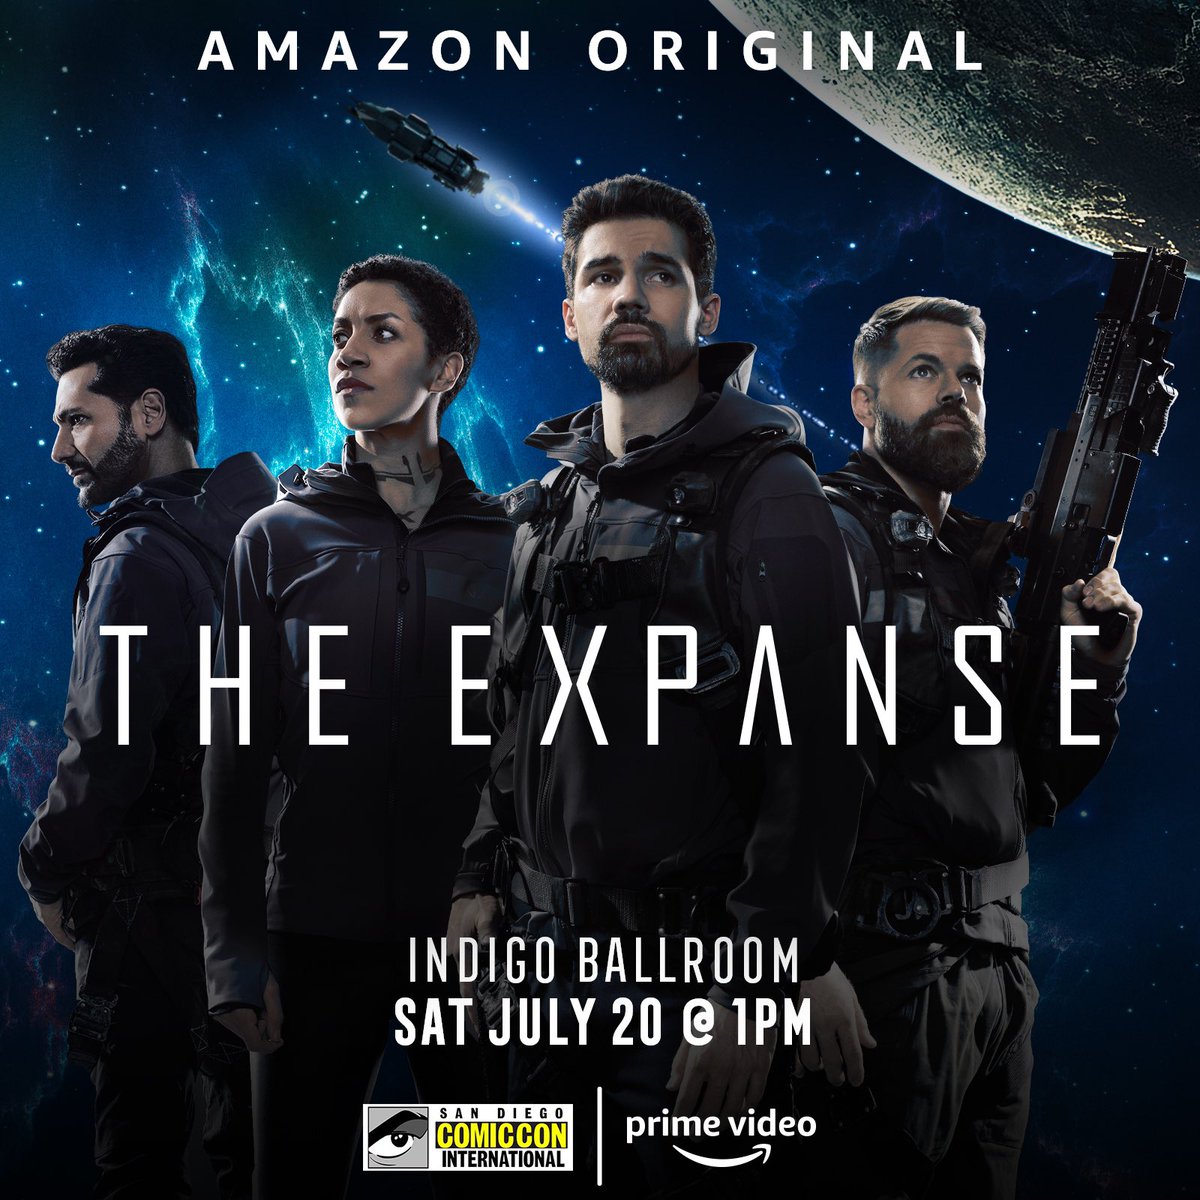 "THE EXPANSE"